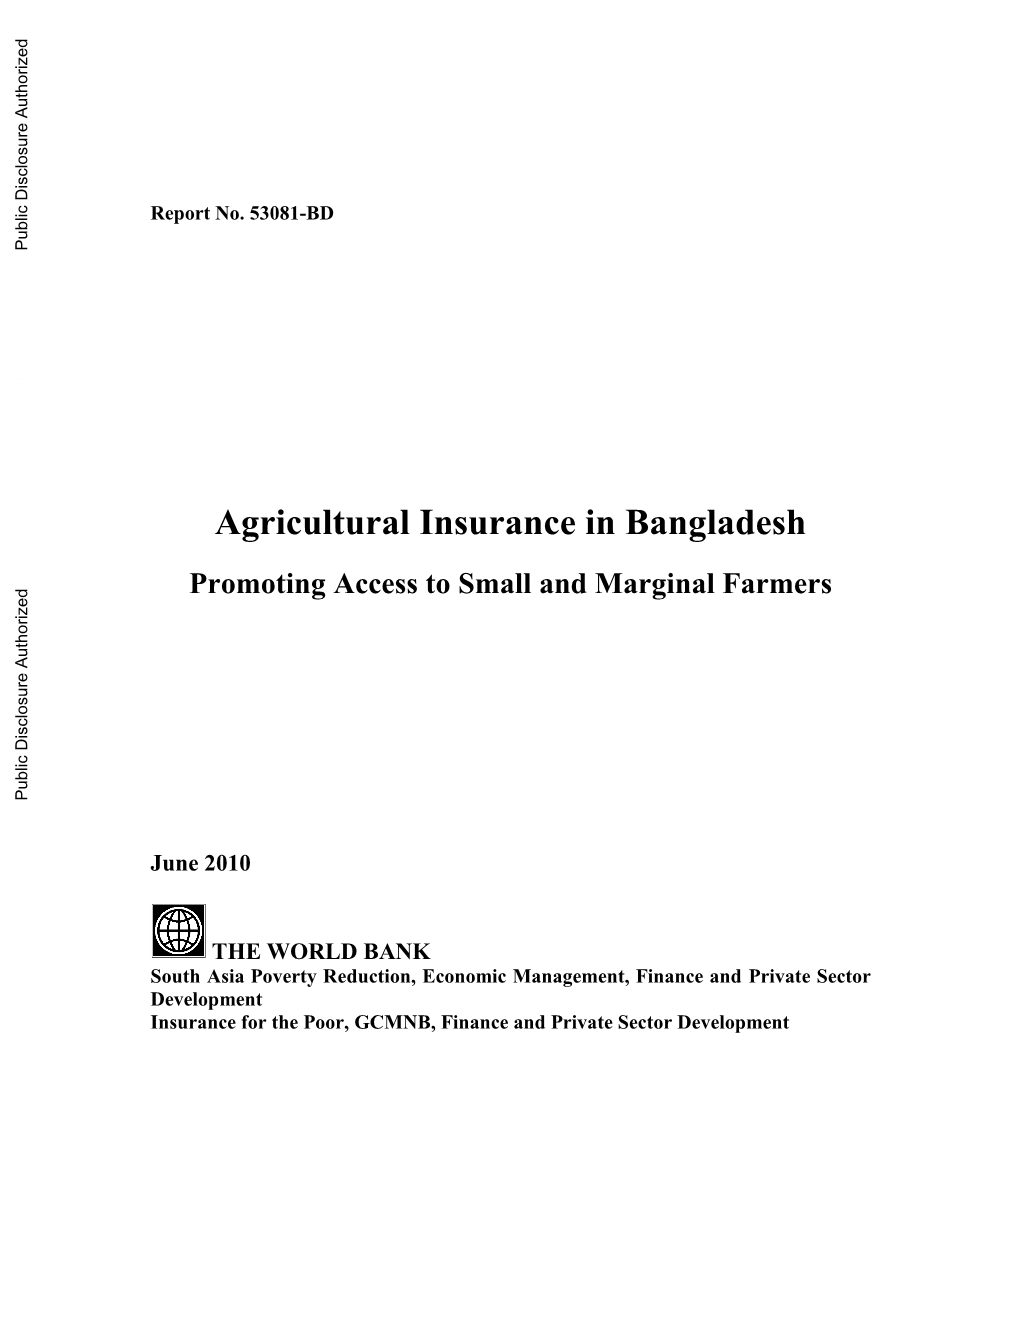 Agricultural Insurance in Bangladesh